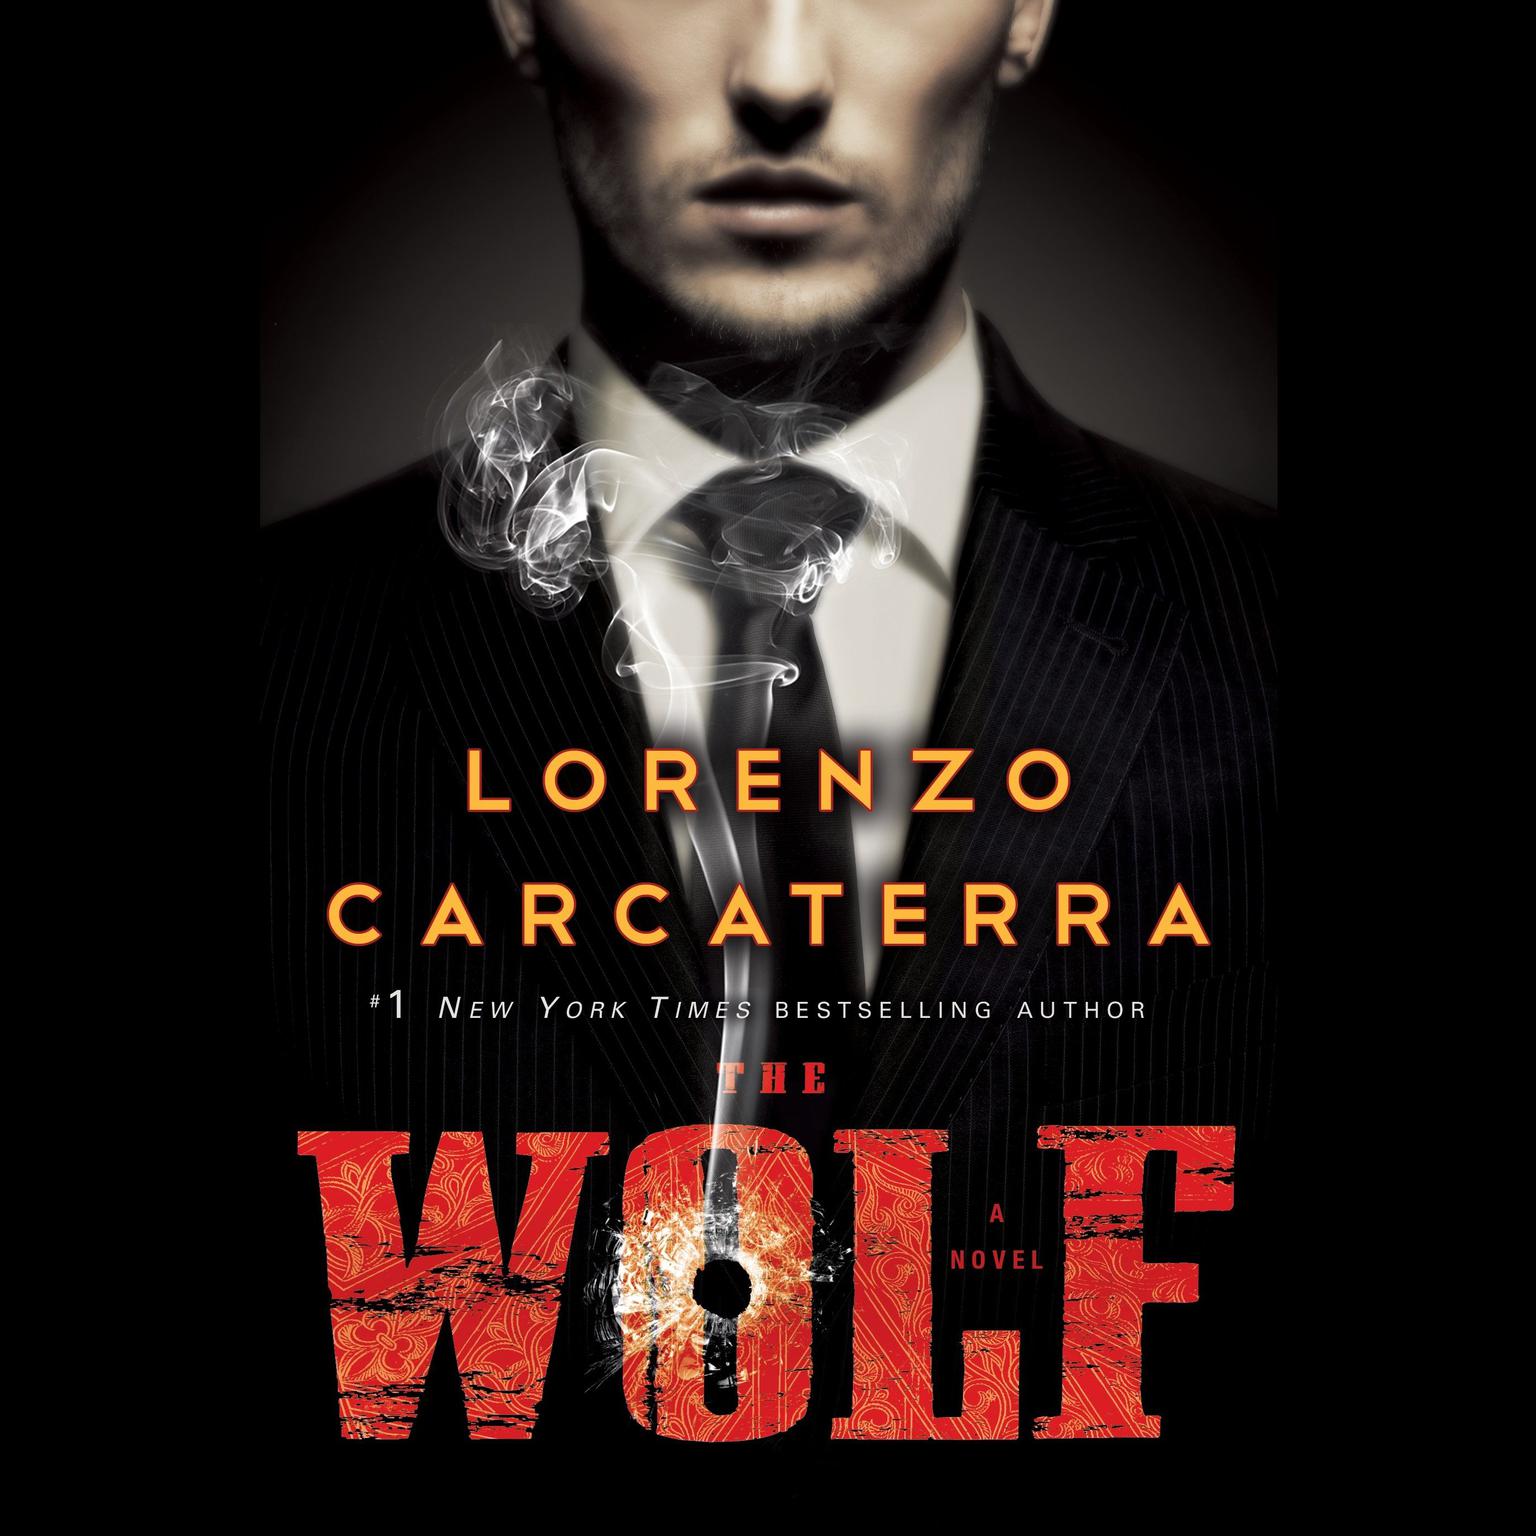 The Wolf: A Novel Audiobook, by Lorenzo Carcaterra